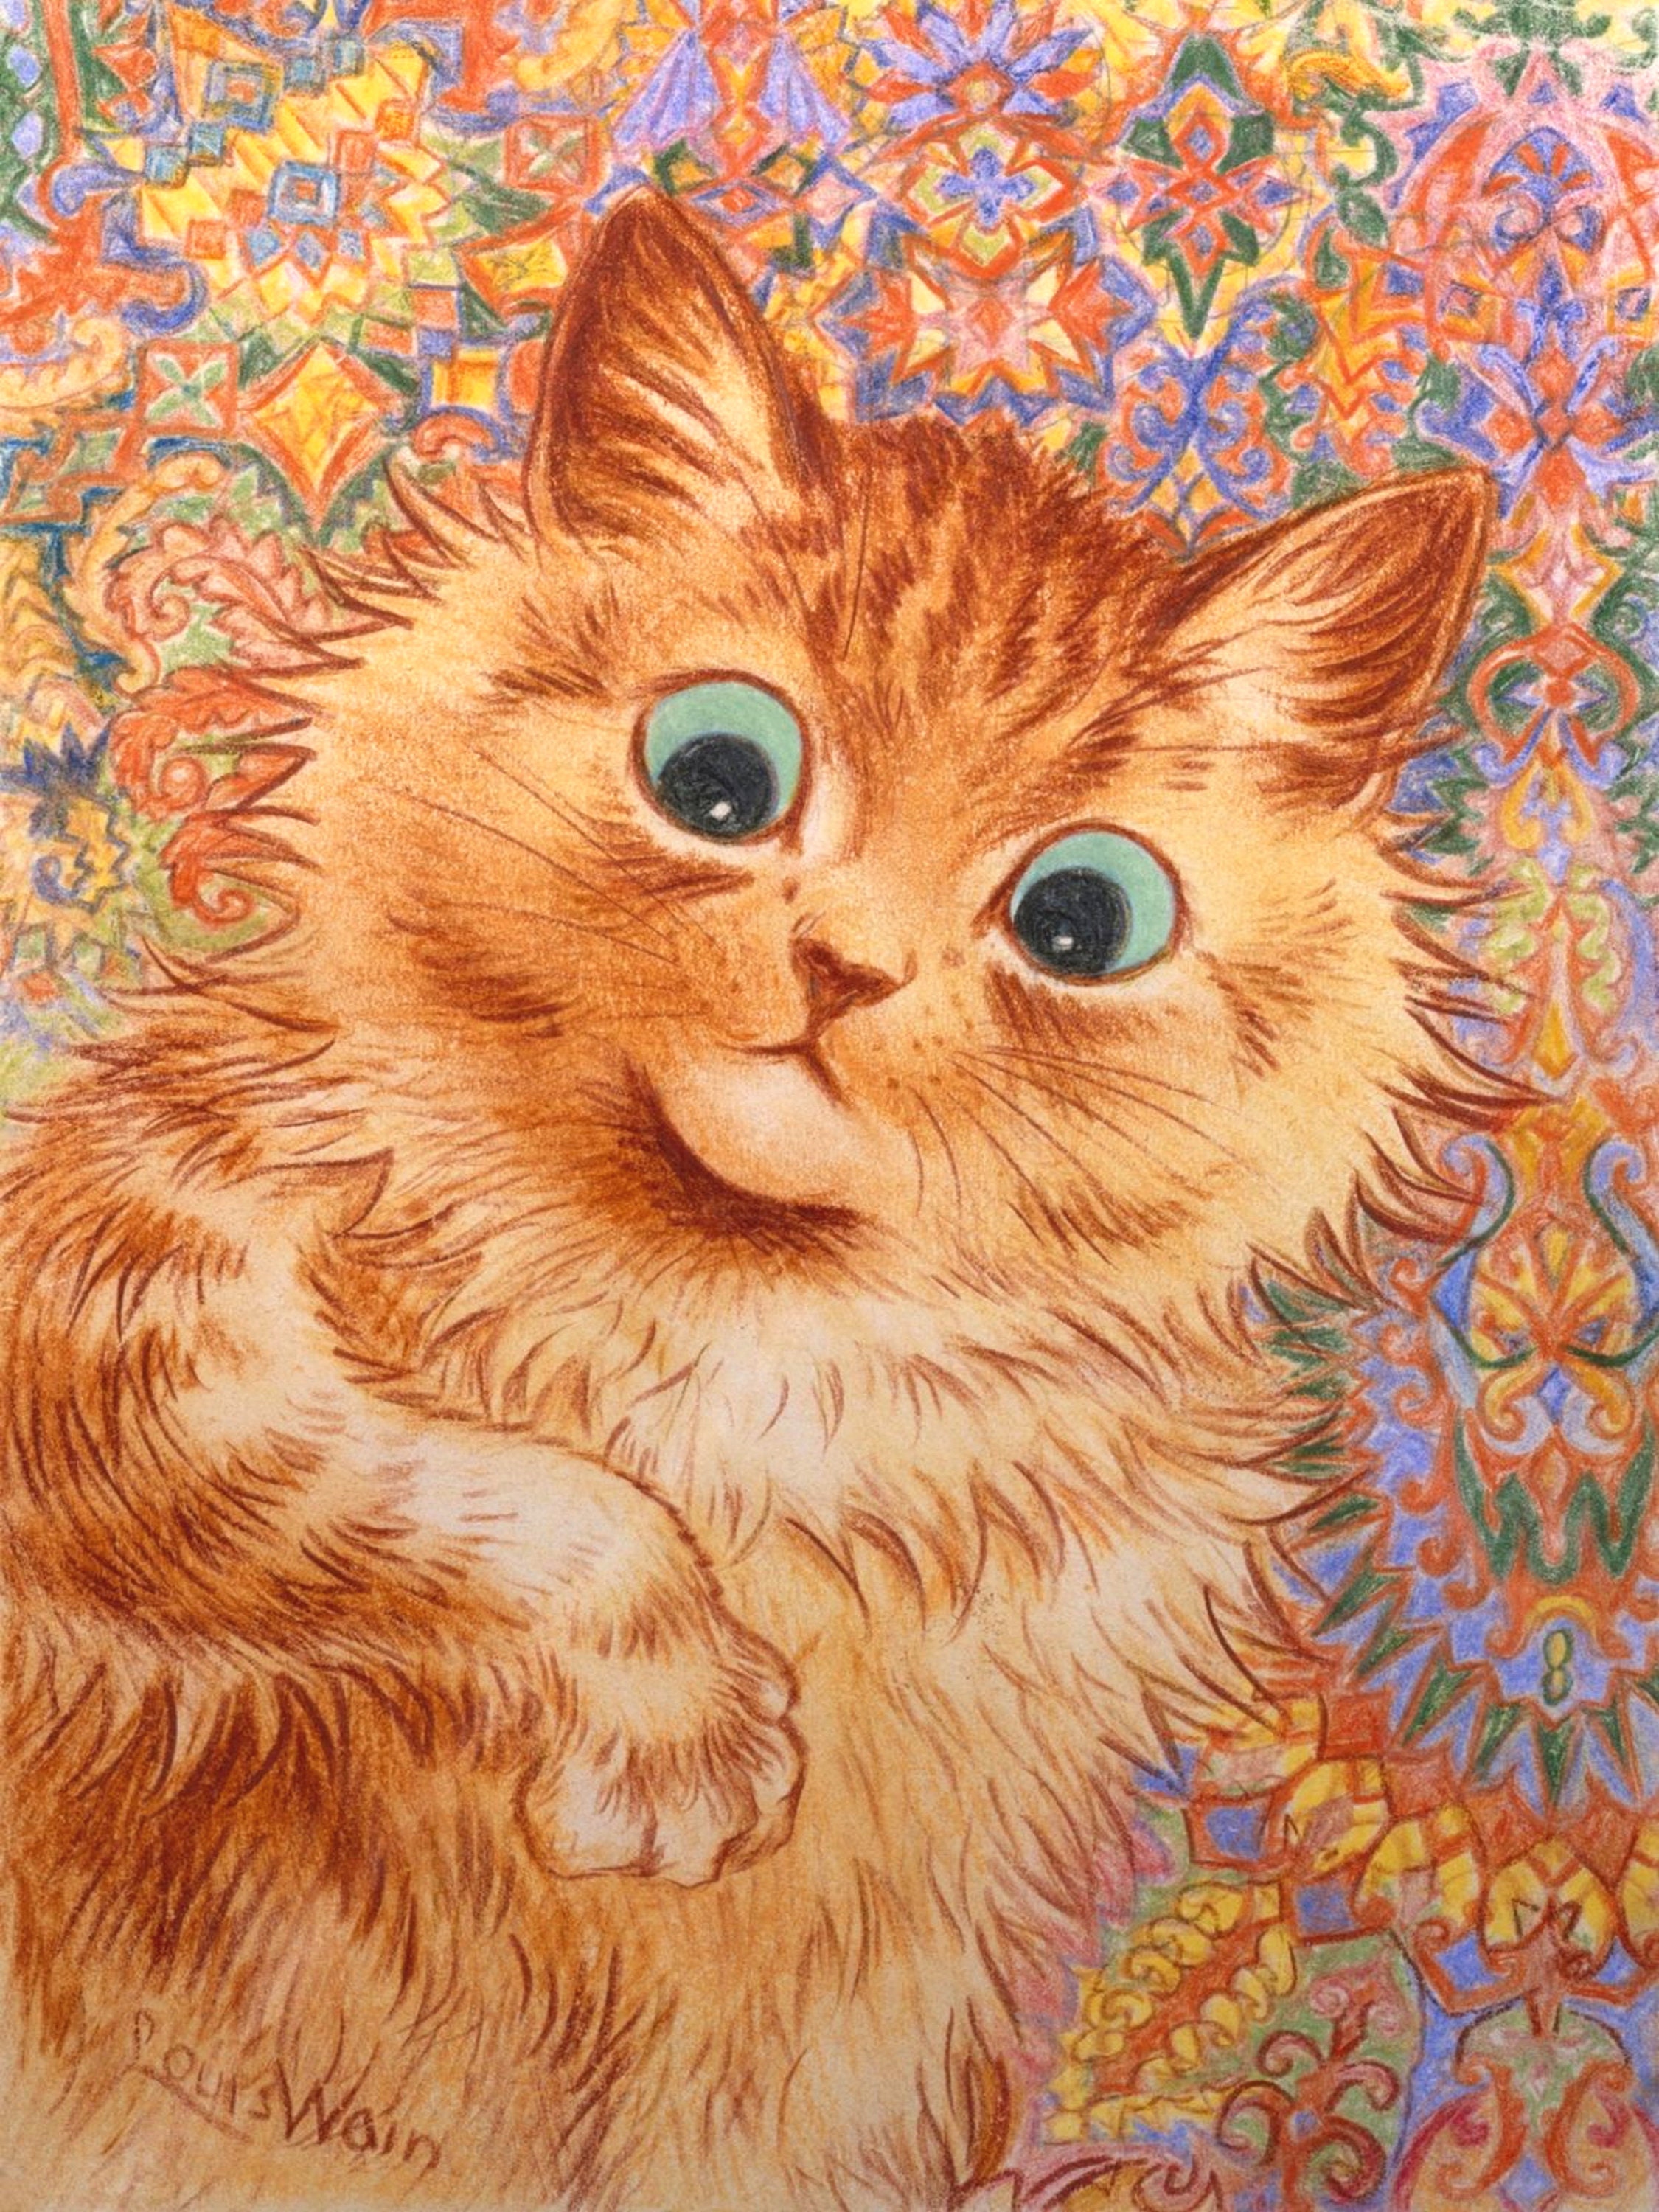 Sewing Cat by Louis Wain - Sewing - Posters and Art Prints